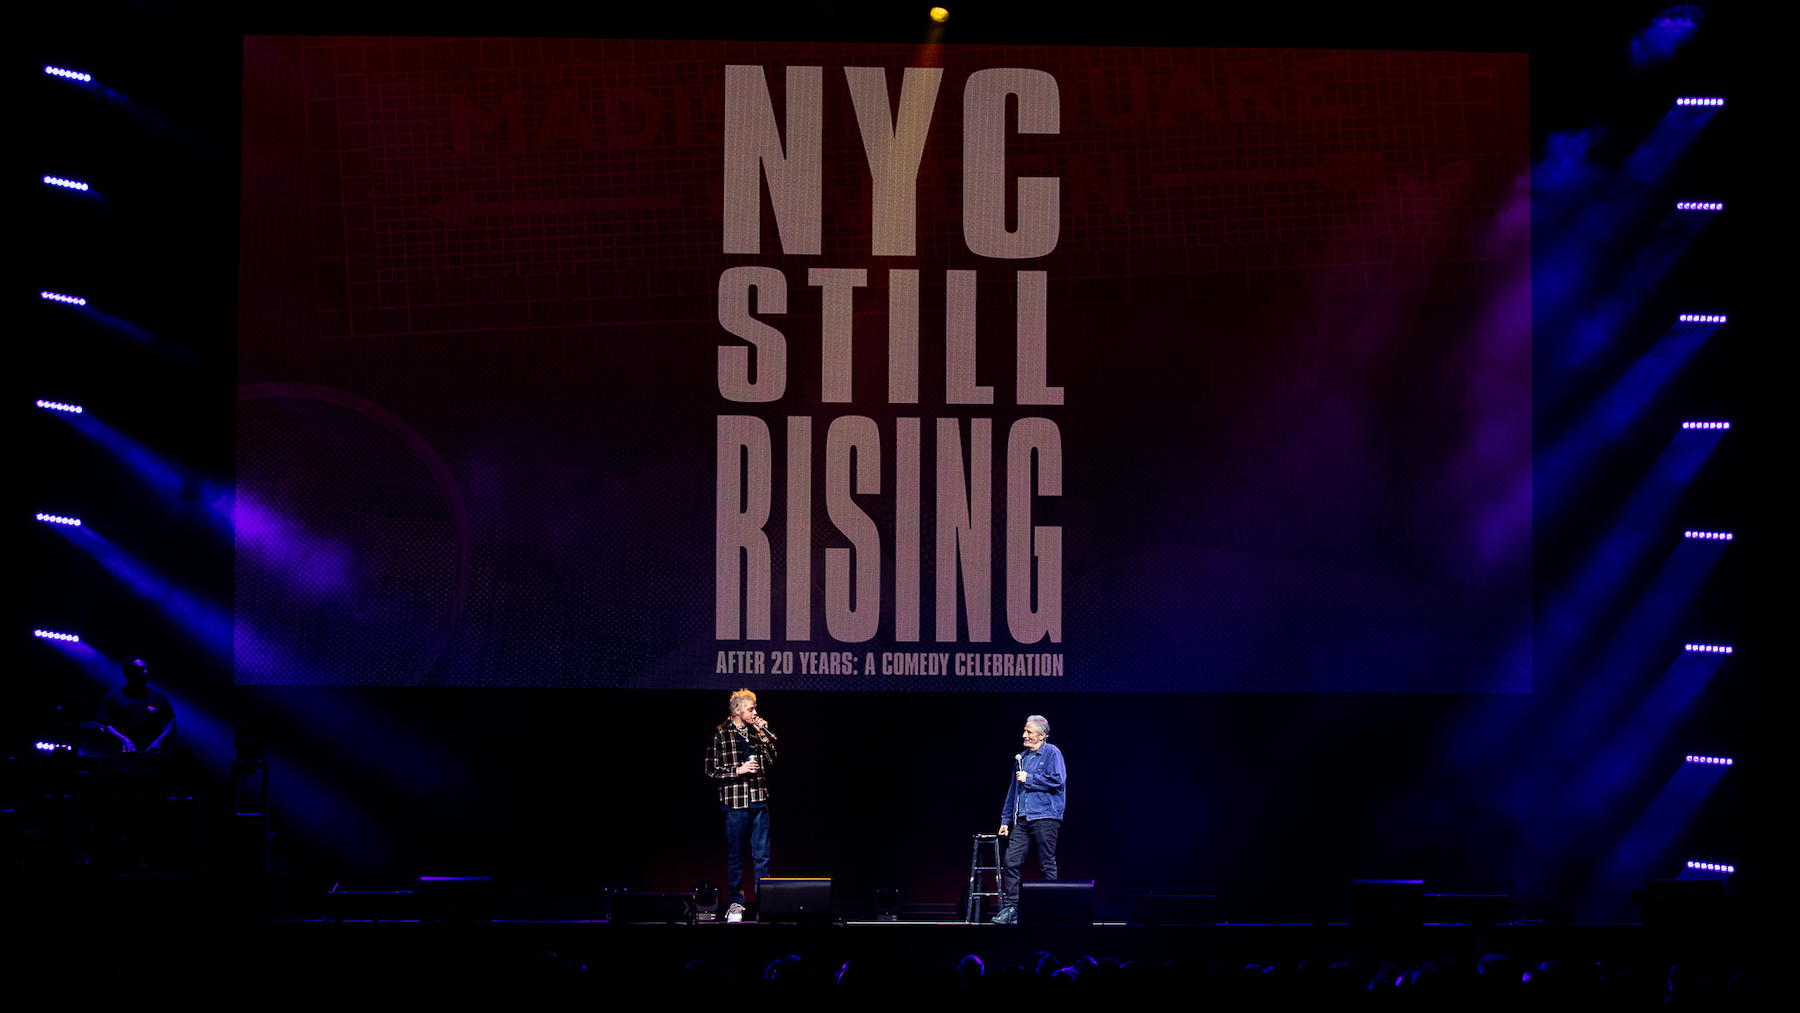 Photo 6 in 'NYC STILL RISING After 20 years:  A Comedy Celebration' gallery showcasing lighting design by Mike Baldassari of Mike-O-Matic Industries LLC